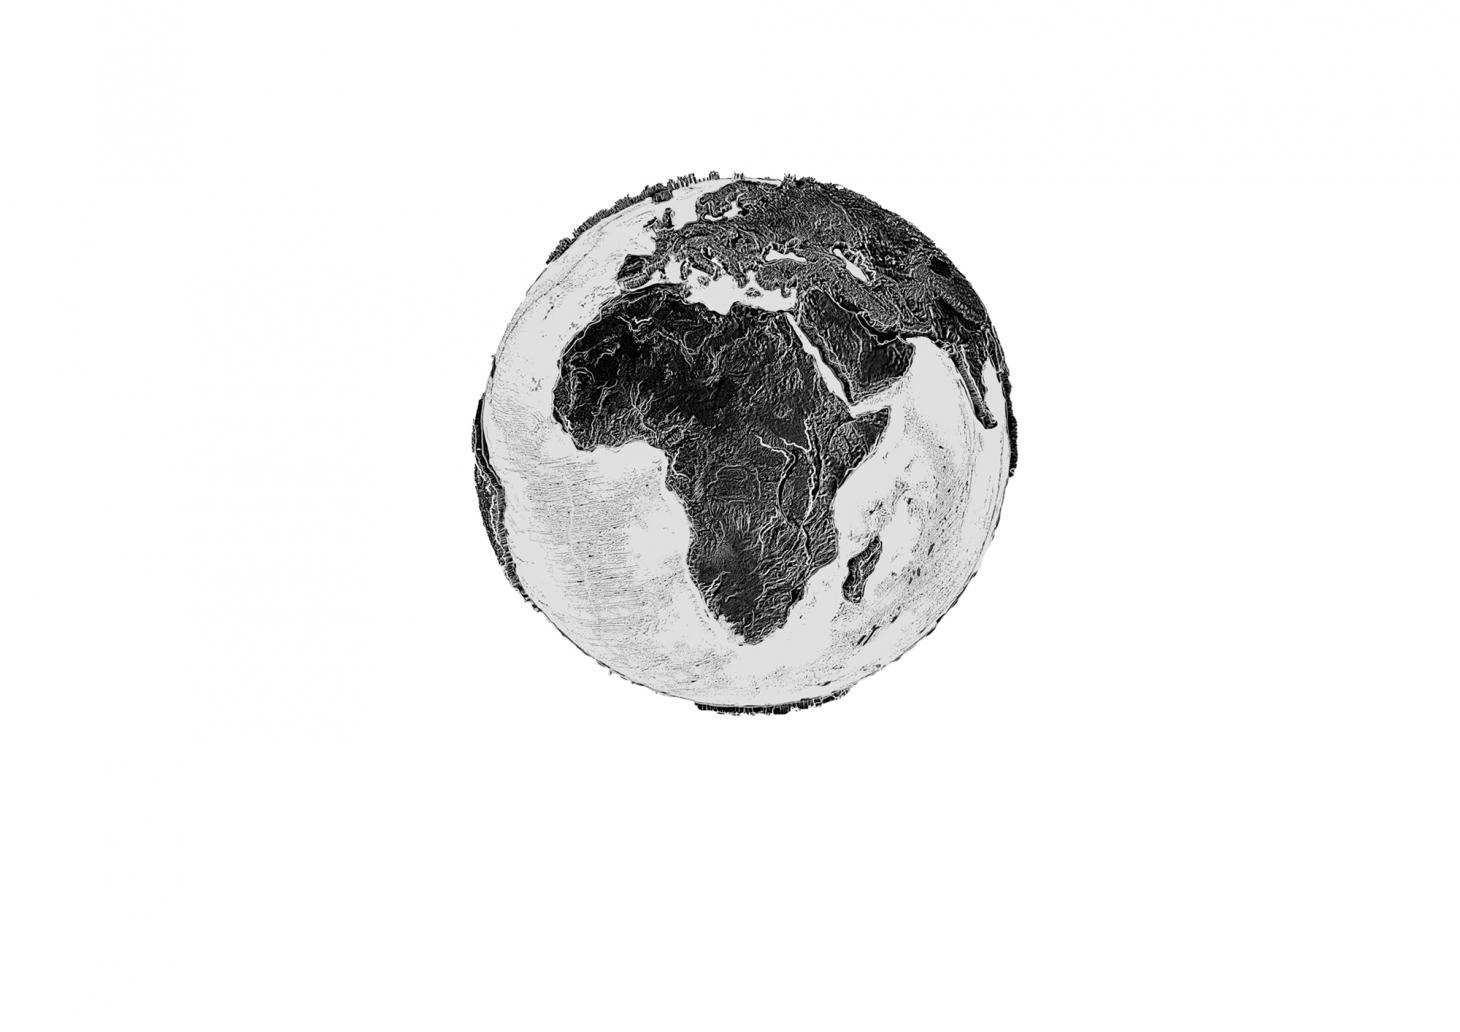 The Wick - Globe by London-based poet and artist Julianknxx